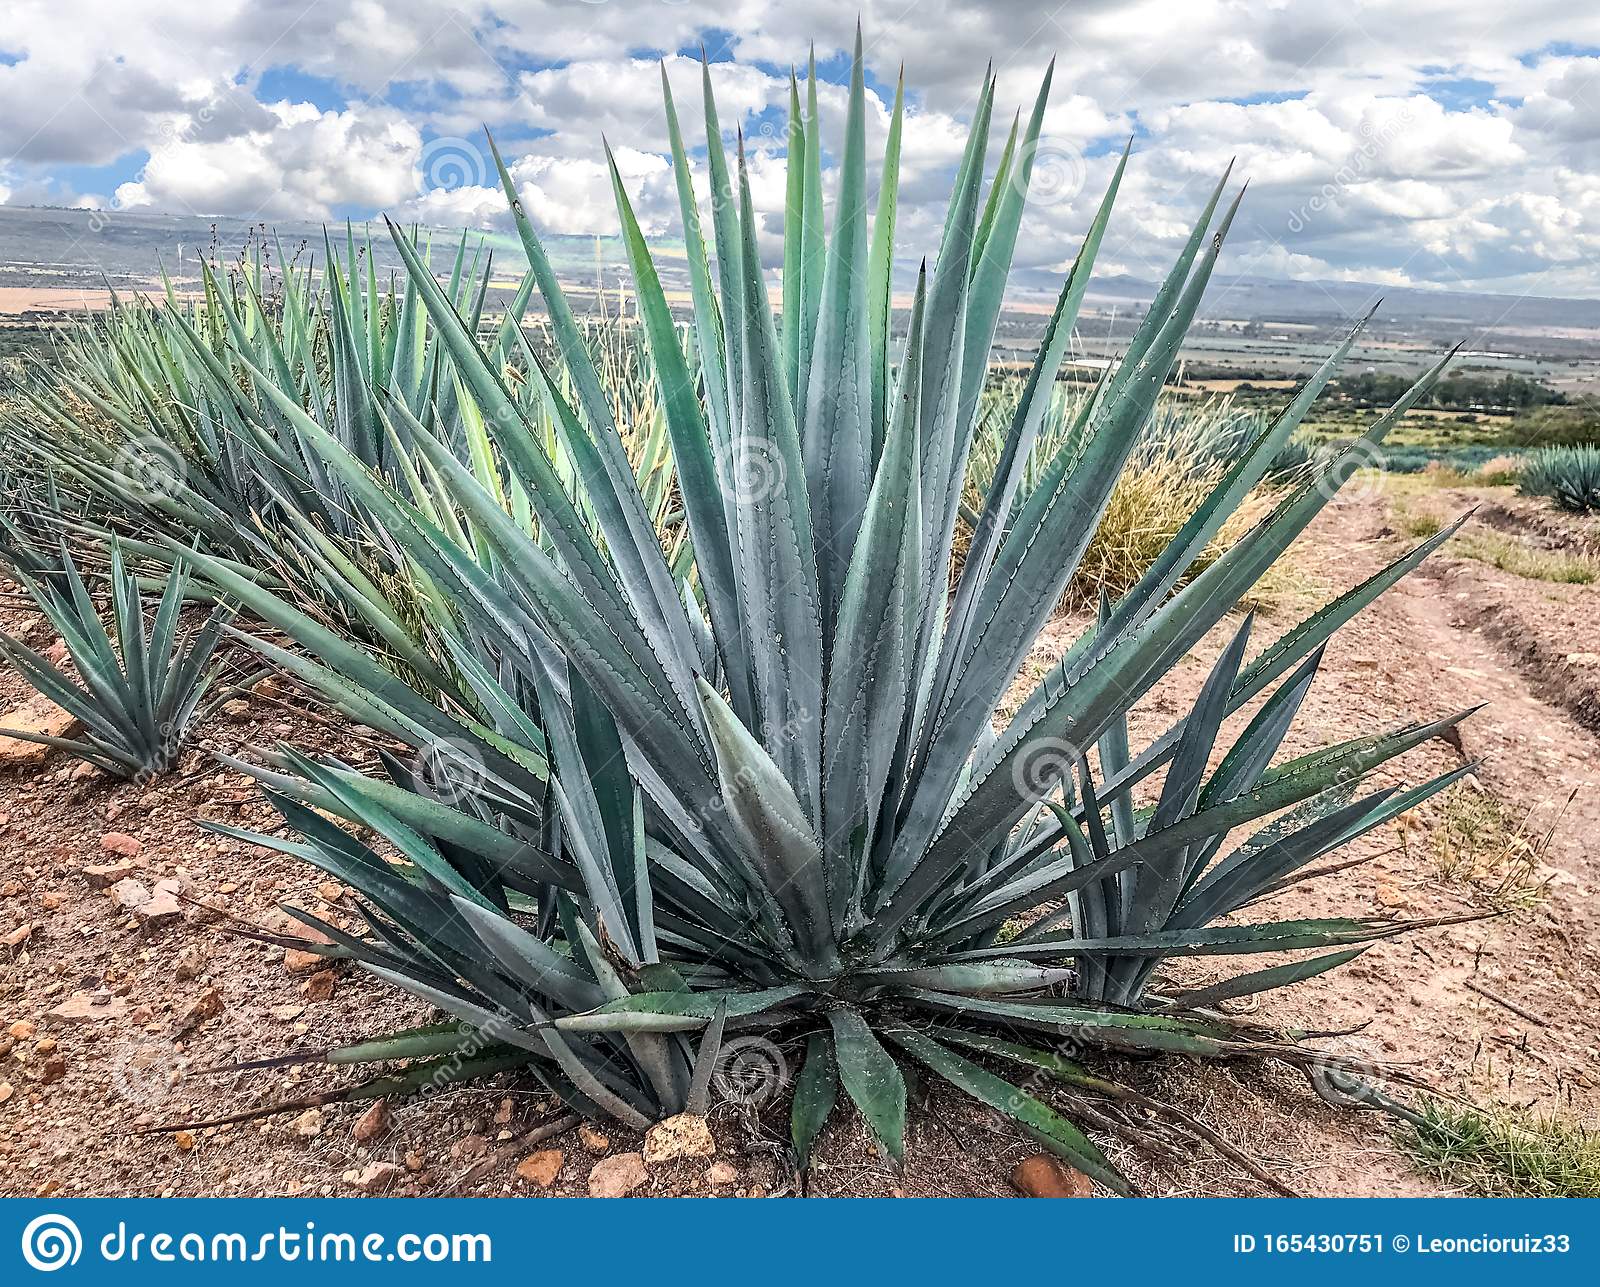 Blue Agave Plant, Ready To Make Tequila Stock Image ...